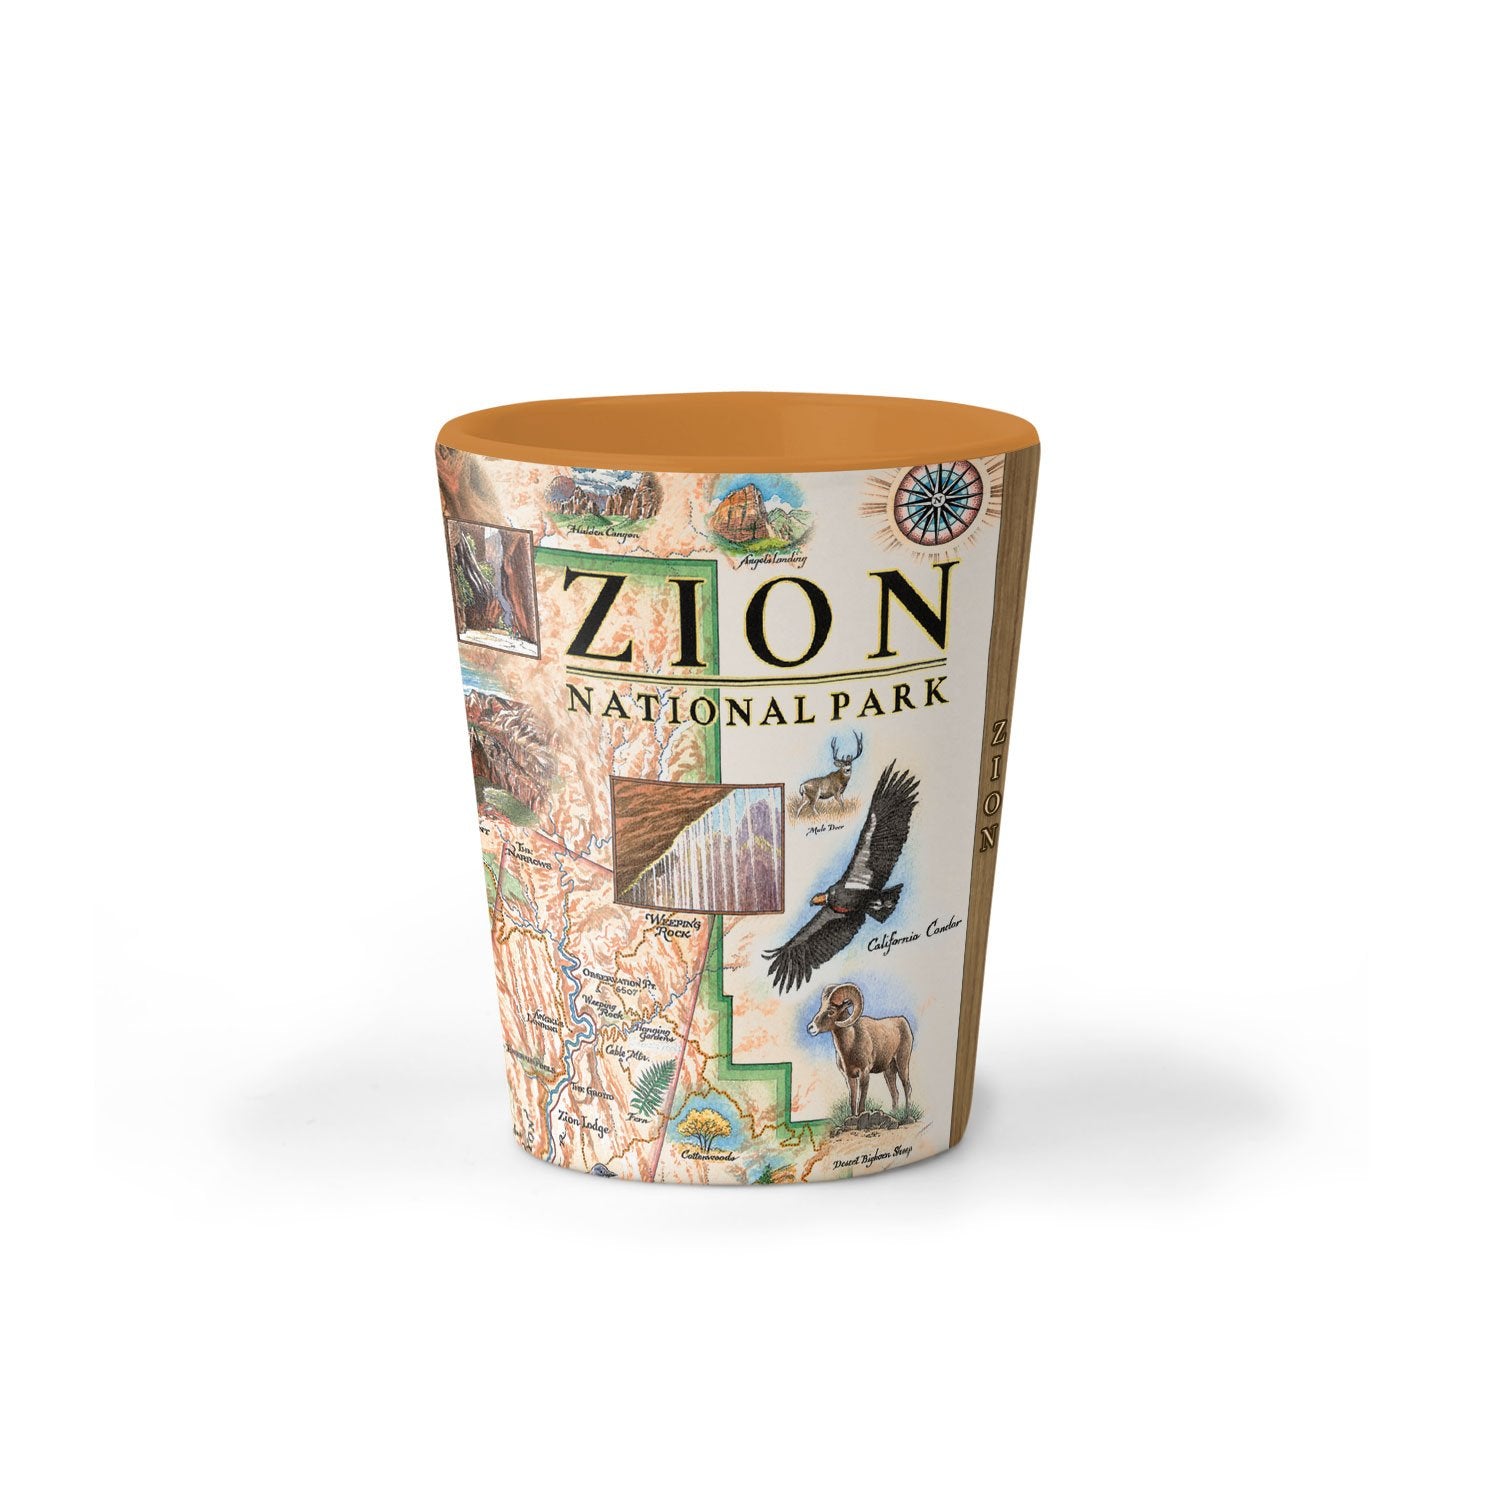 Zion National Park Map Ceramic shot glass by Xplorer Maps. The map features illustrations of Angels Landing, Weeping Rock, The Narrows, and Kolob Canyon. Flora and fauna include Mojave desert tortoise, western columbine, and desert marigold. 